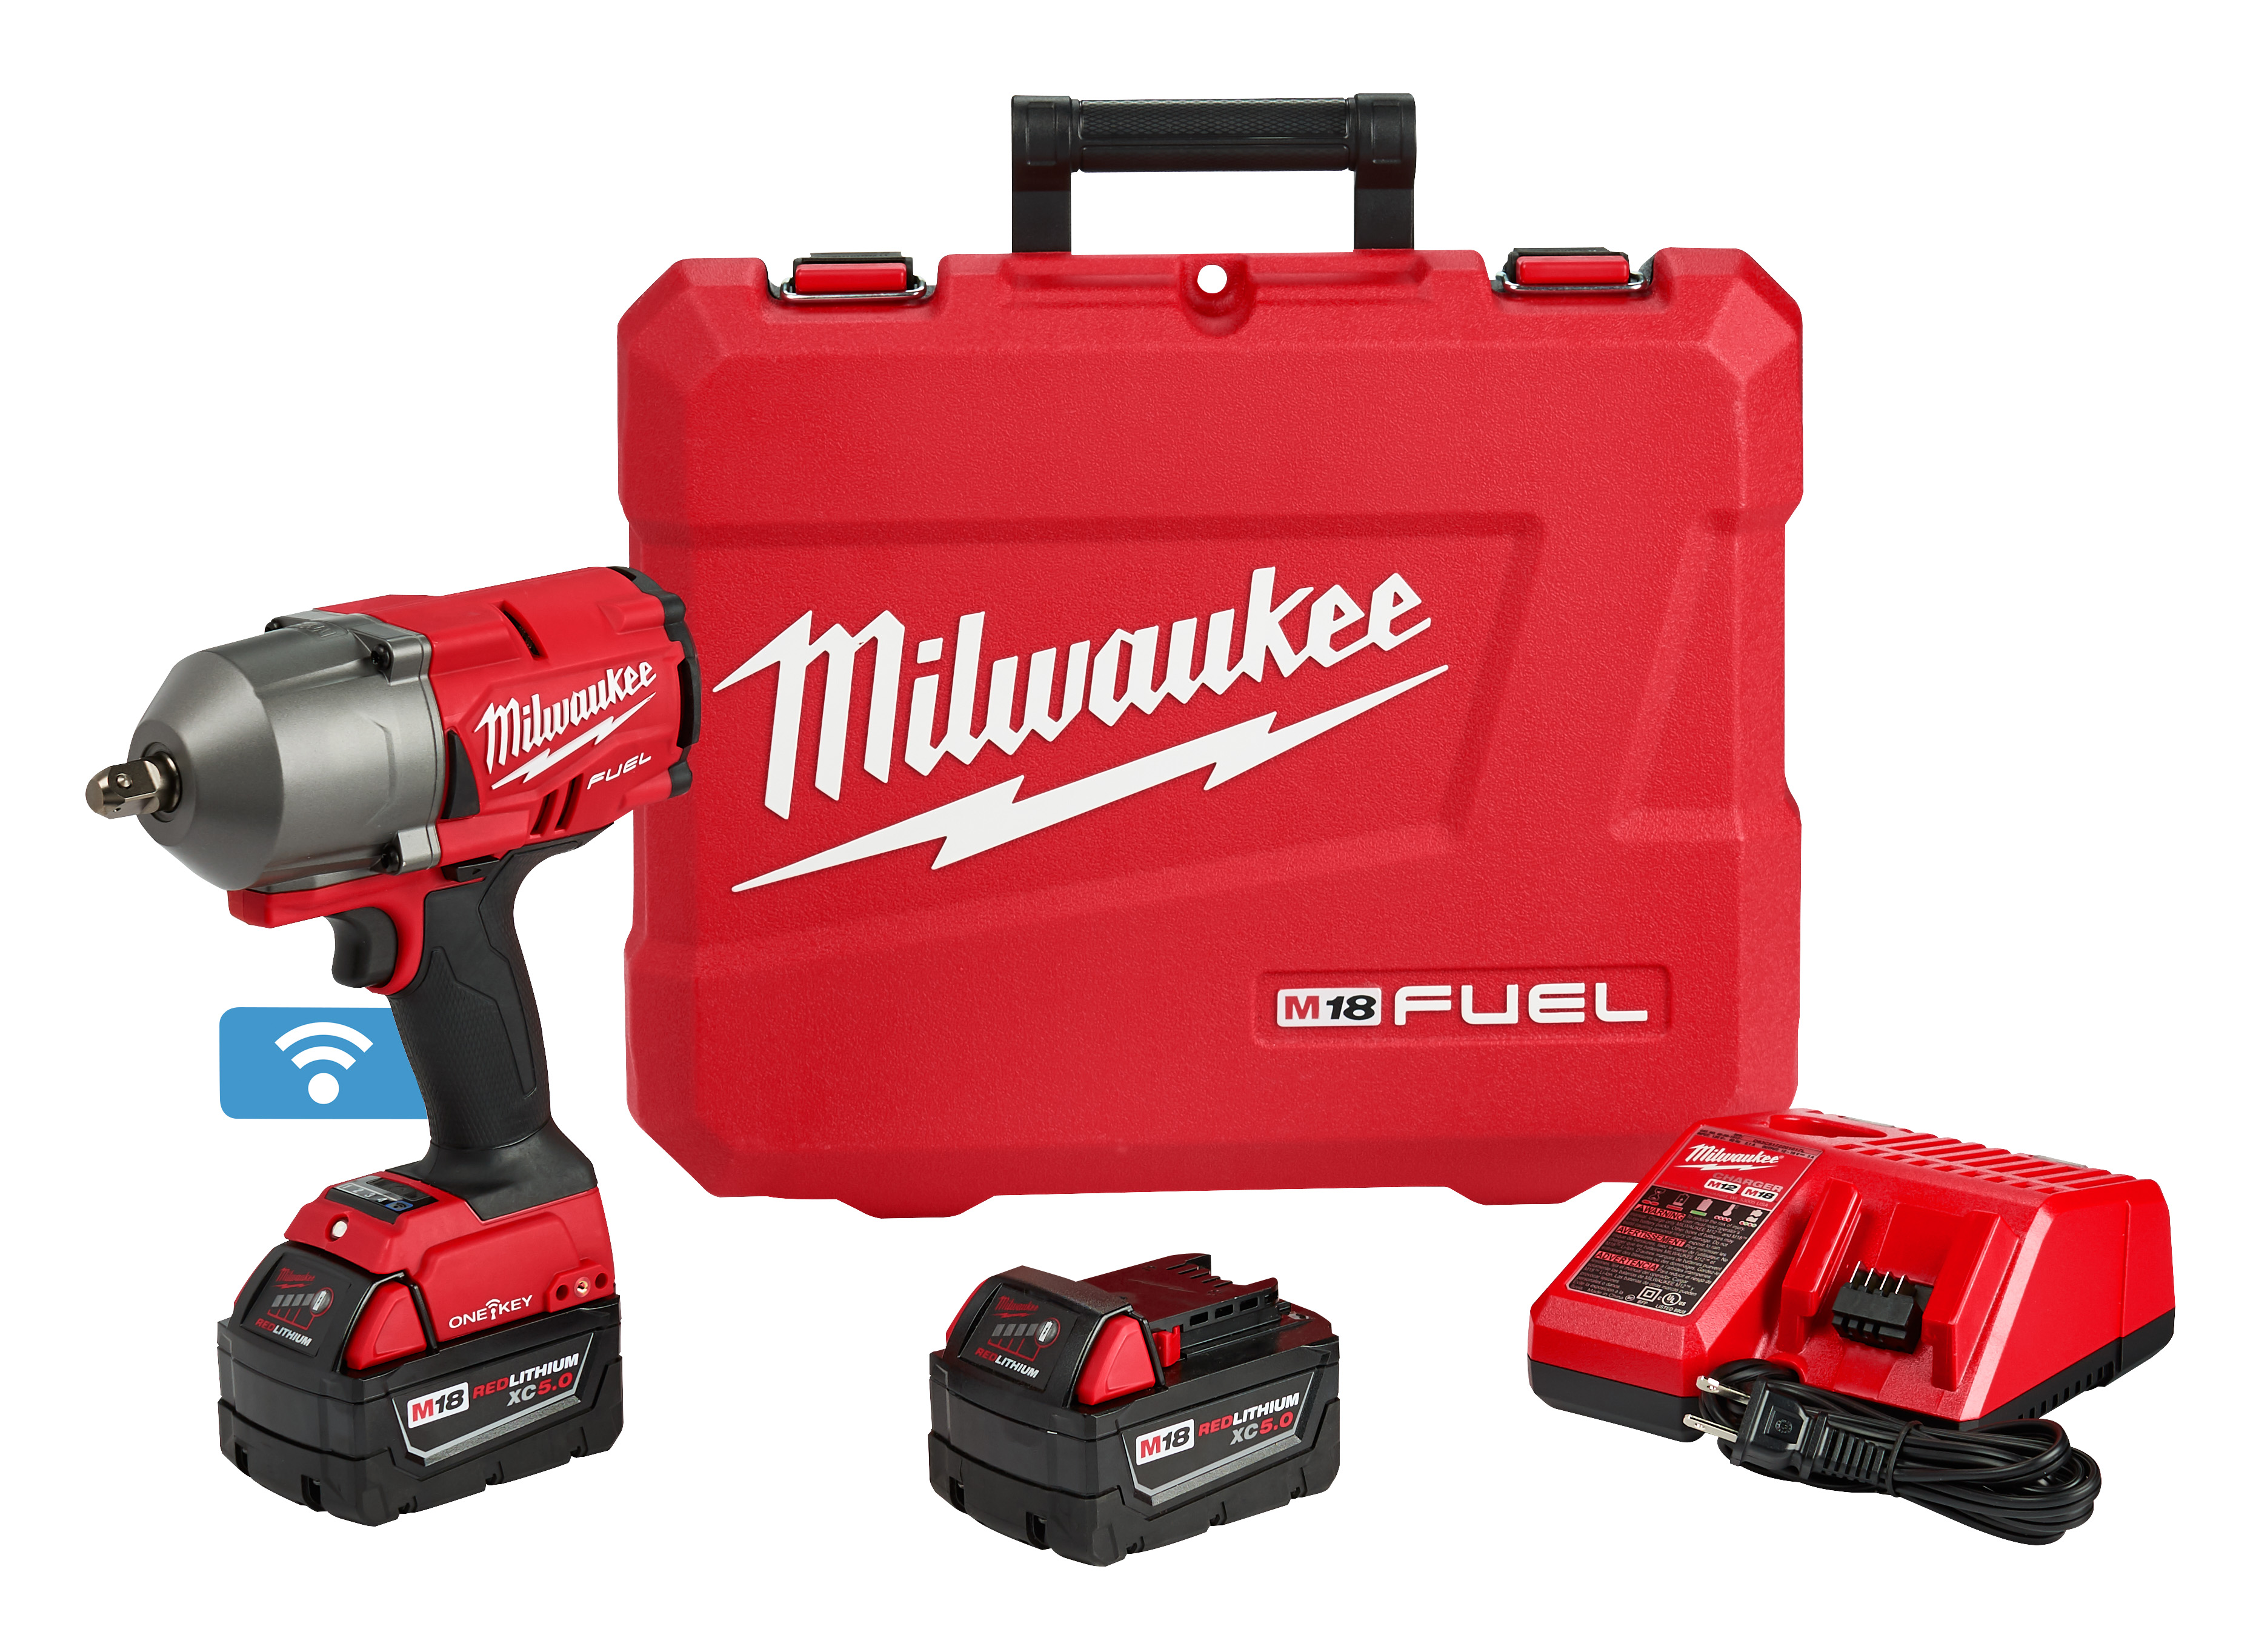 M18 FUEL ONE-KEY 18 Volt Lithium-Ion Cordless 1/2 in. High Torque Impact Wrench with Pin Detent Kit